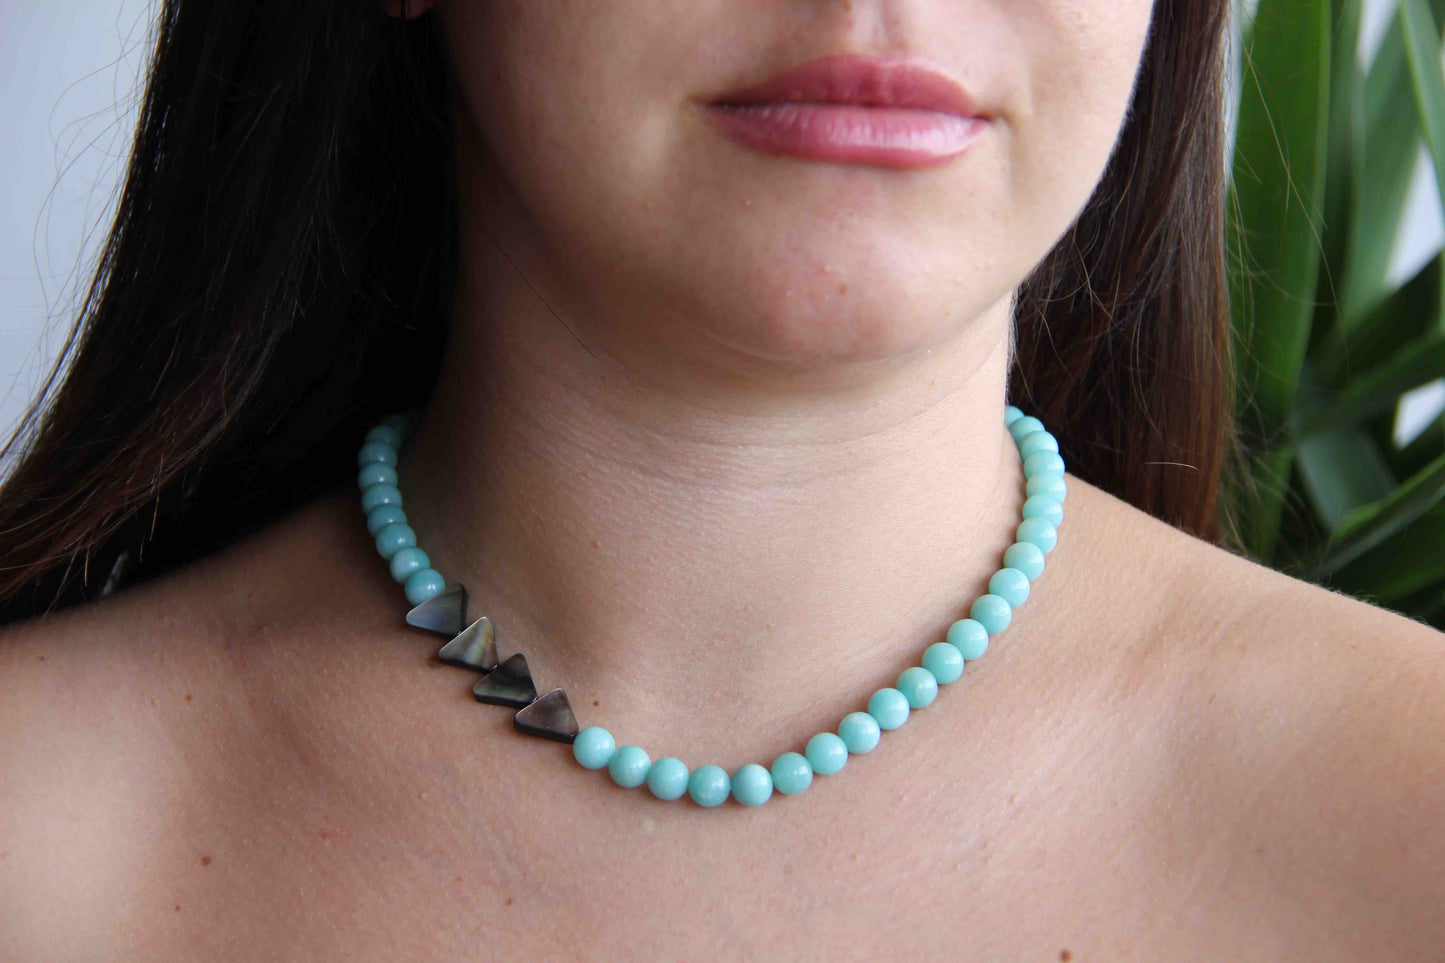 Amazonite Necklace with Mother of Pearl, Amazonite Jewelry, Amazonite, Necklace of Courage, Amazonite Stone Meaning